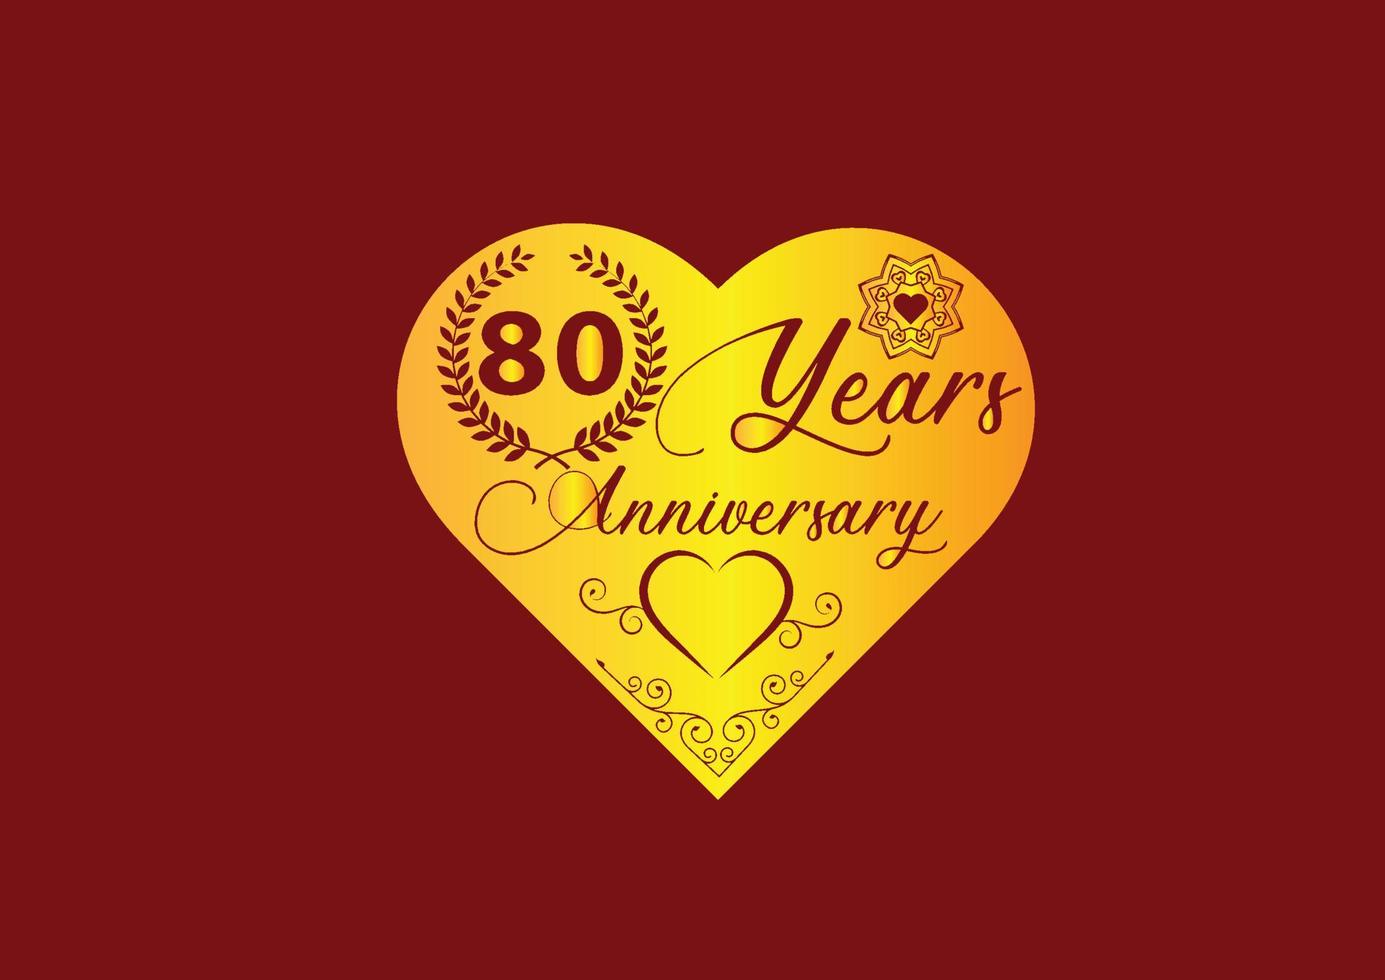 80 years anniversary celebration with love logo and icon design vector